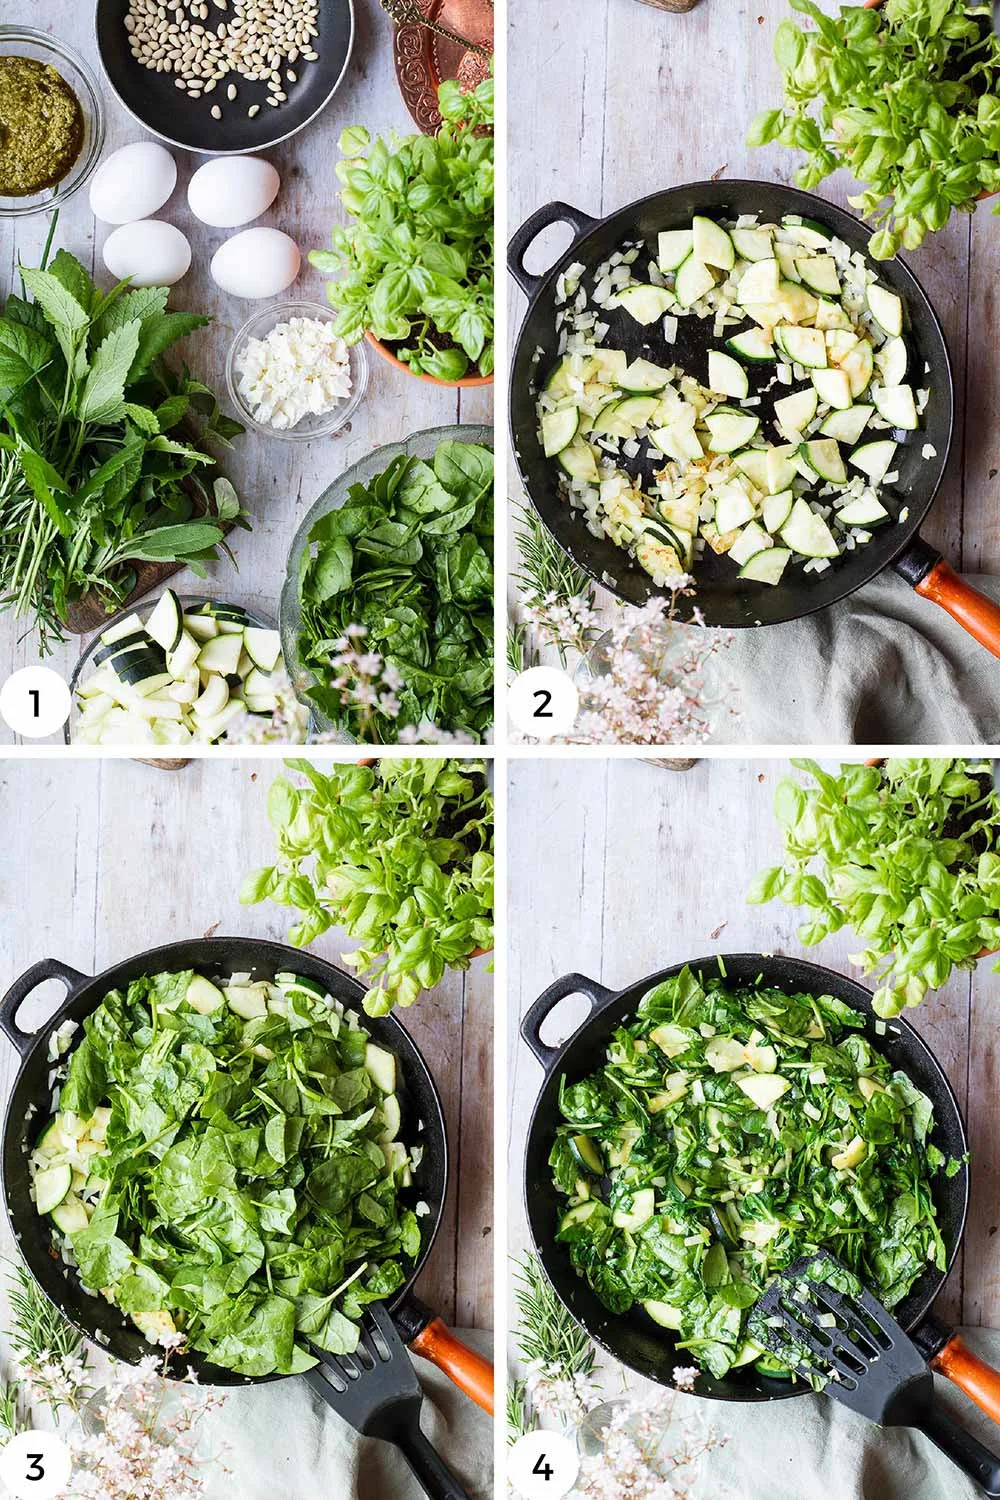 Steps to make the bed of spinach.